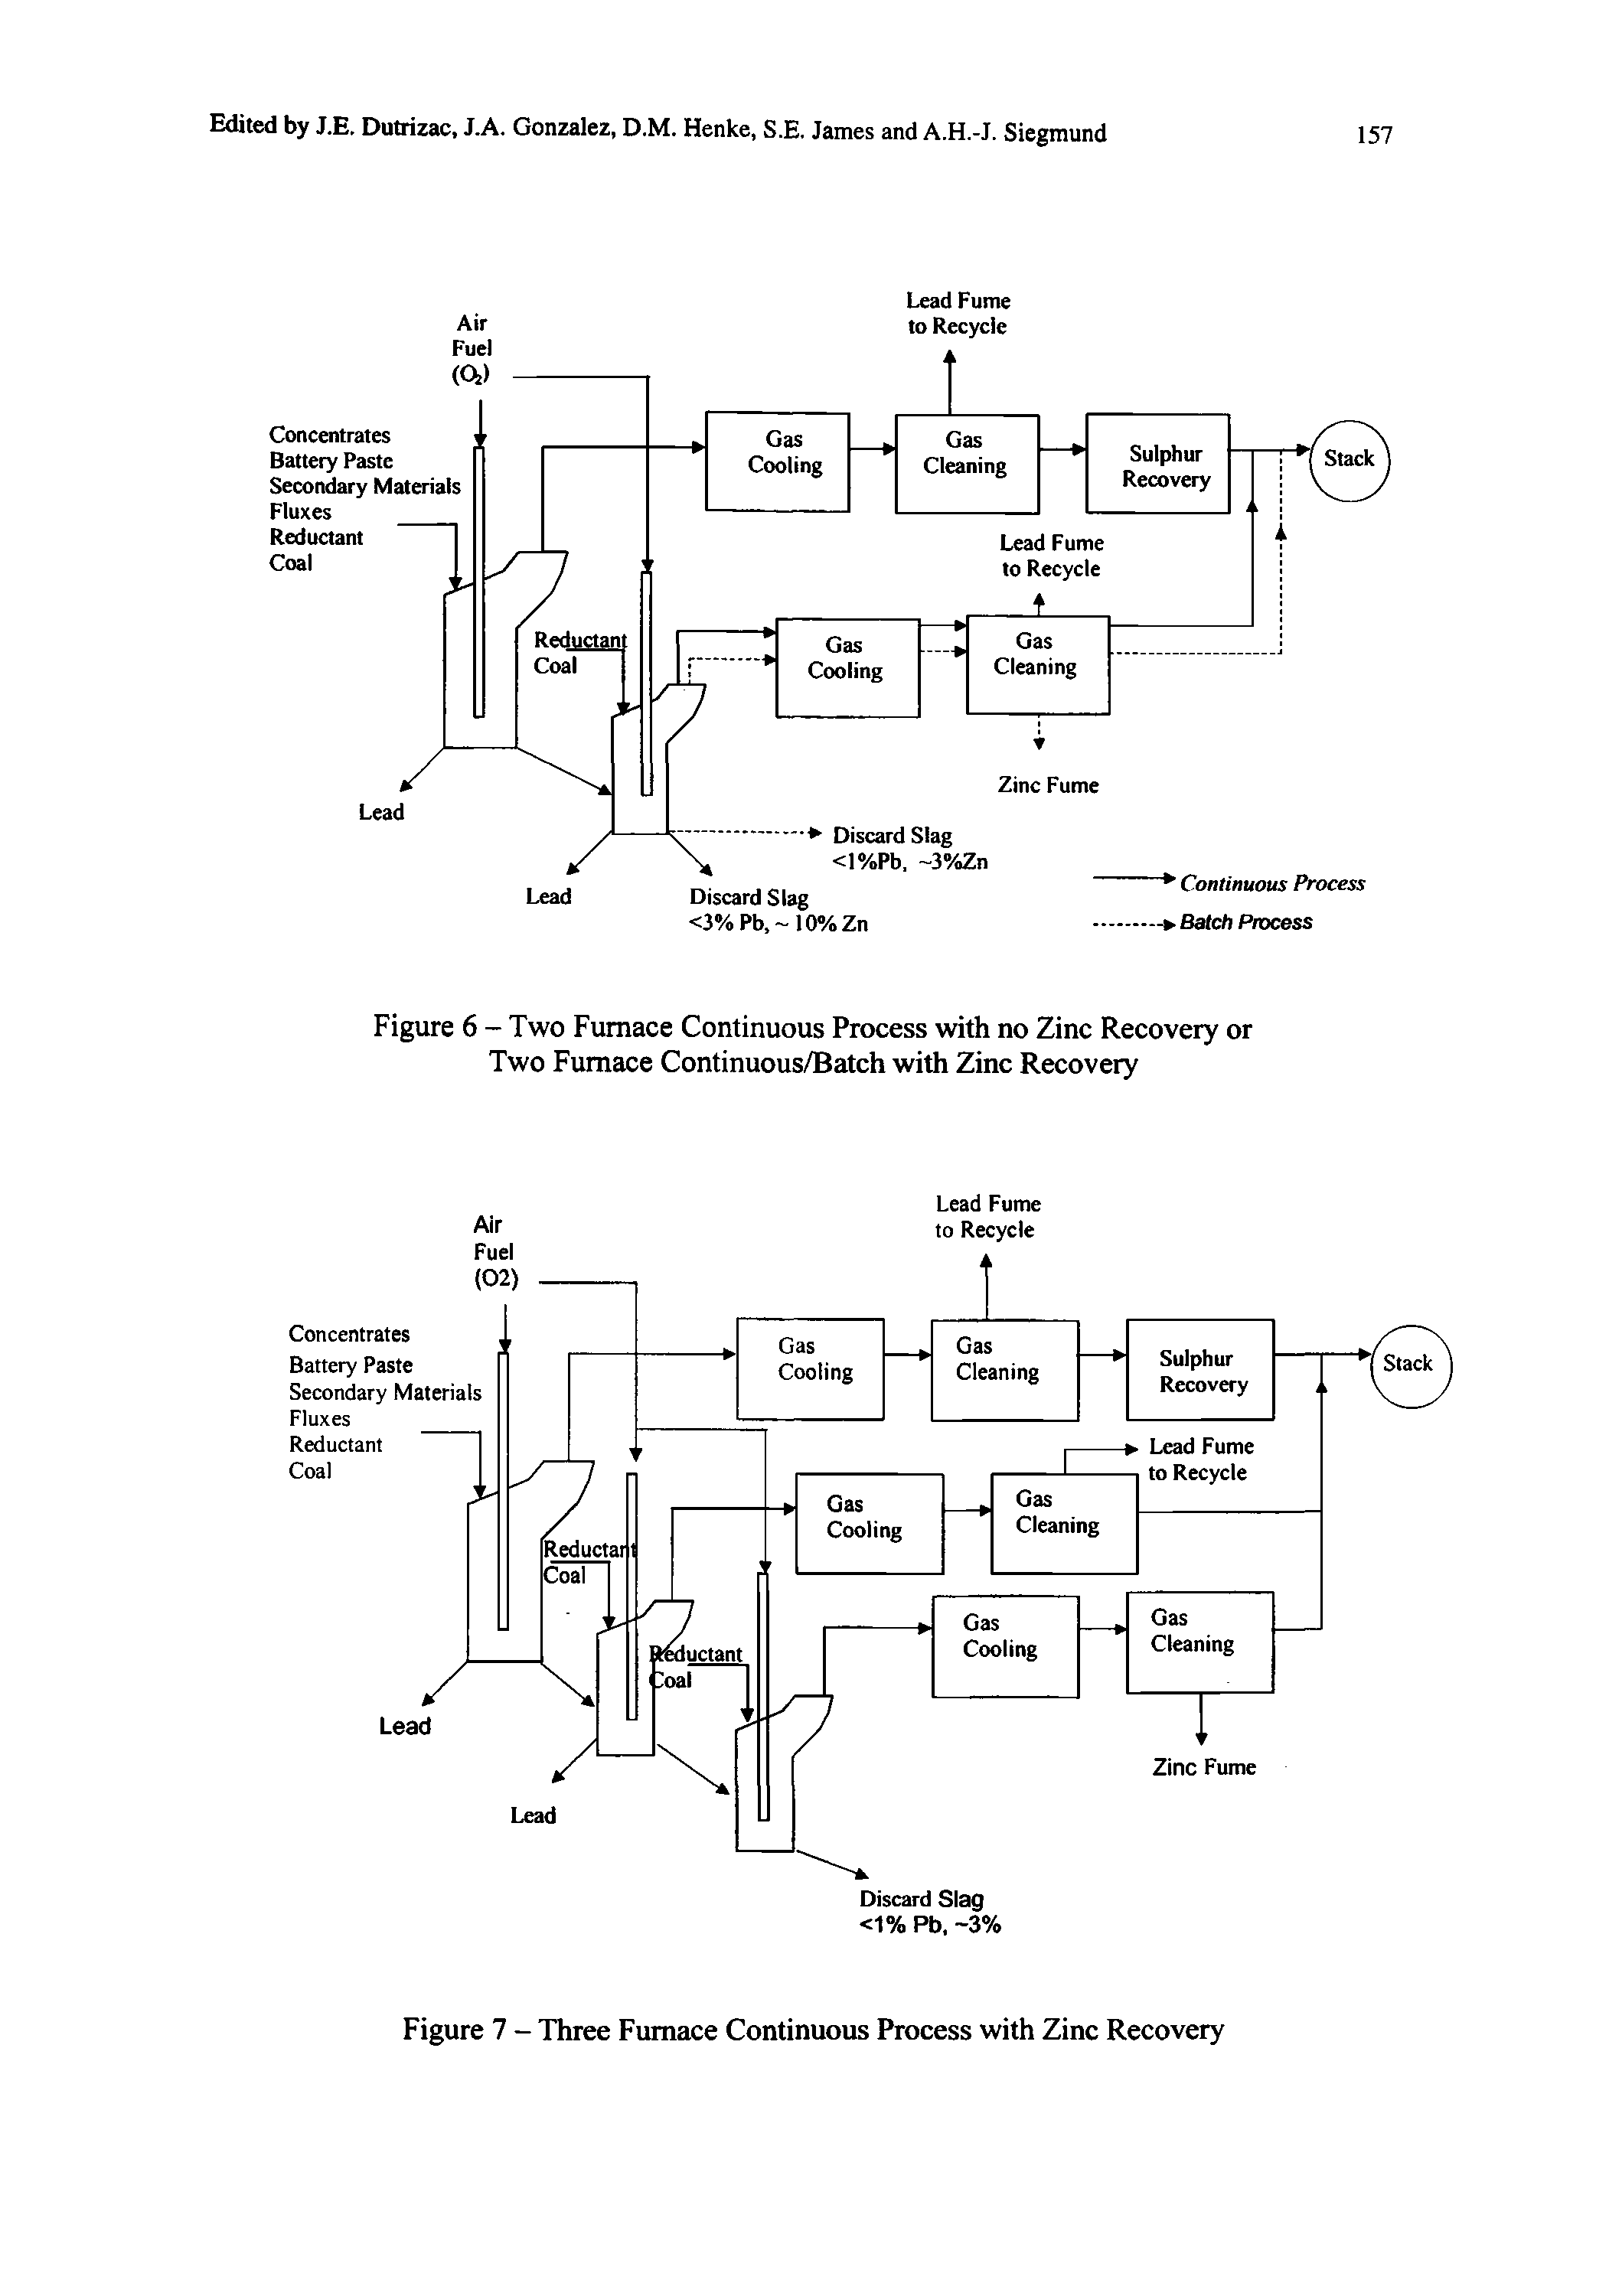 Figure 7 - Three Furnace Continuous Process with Zinc Recovery...